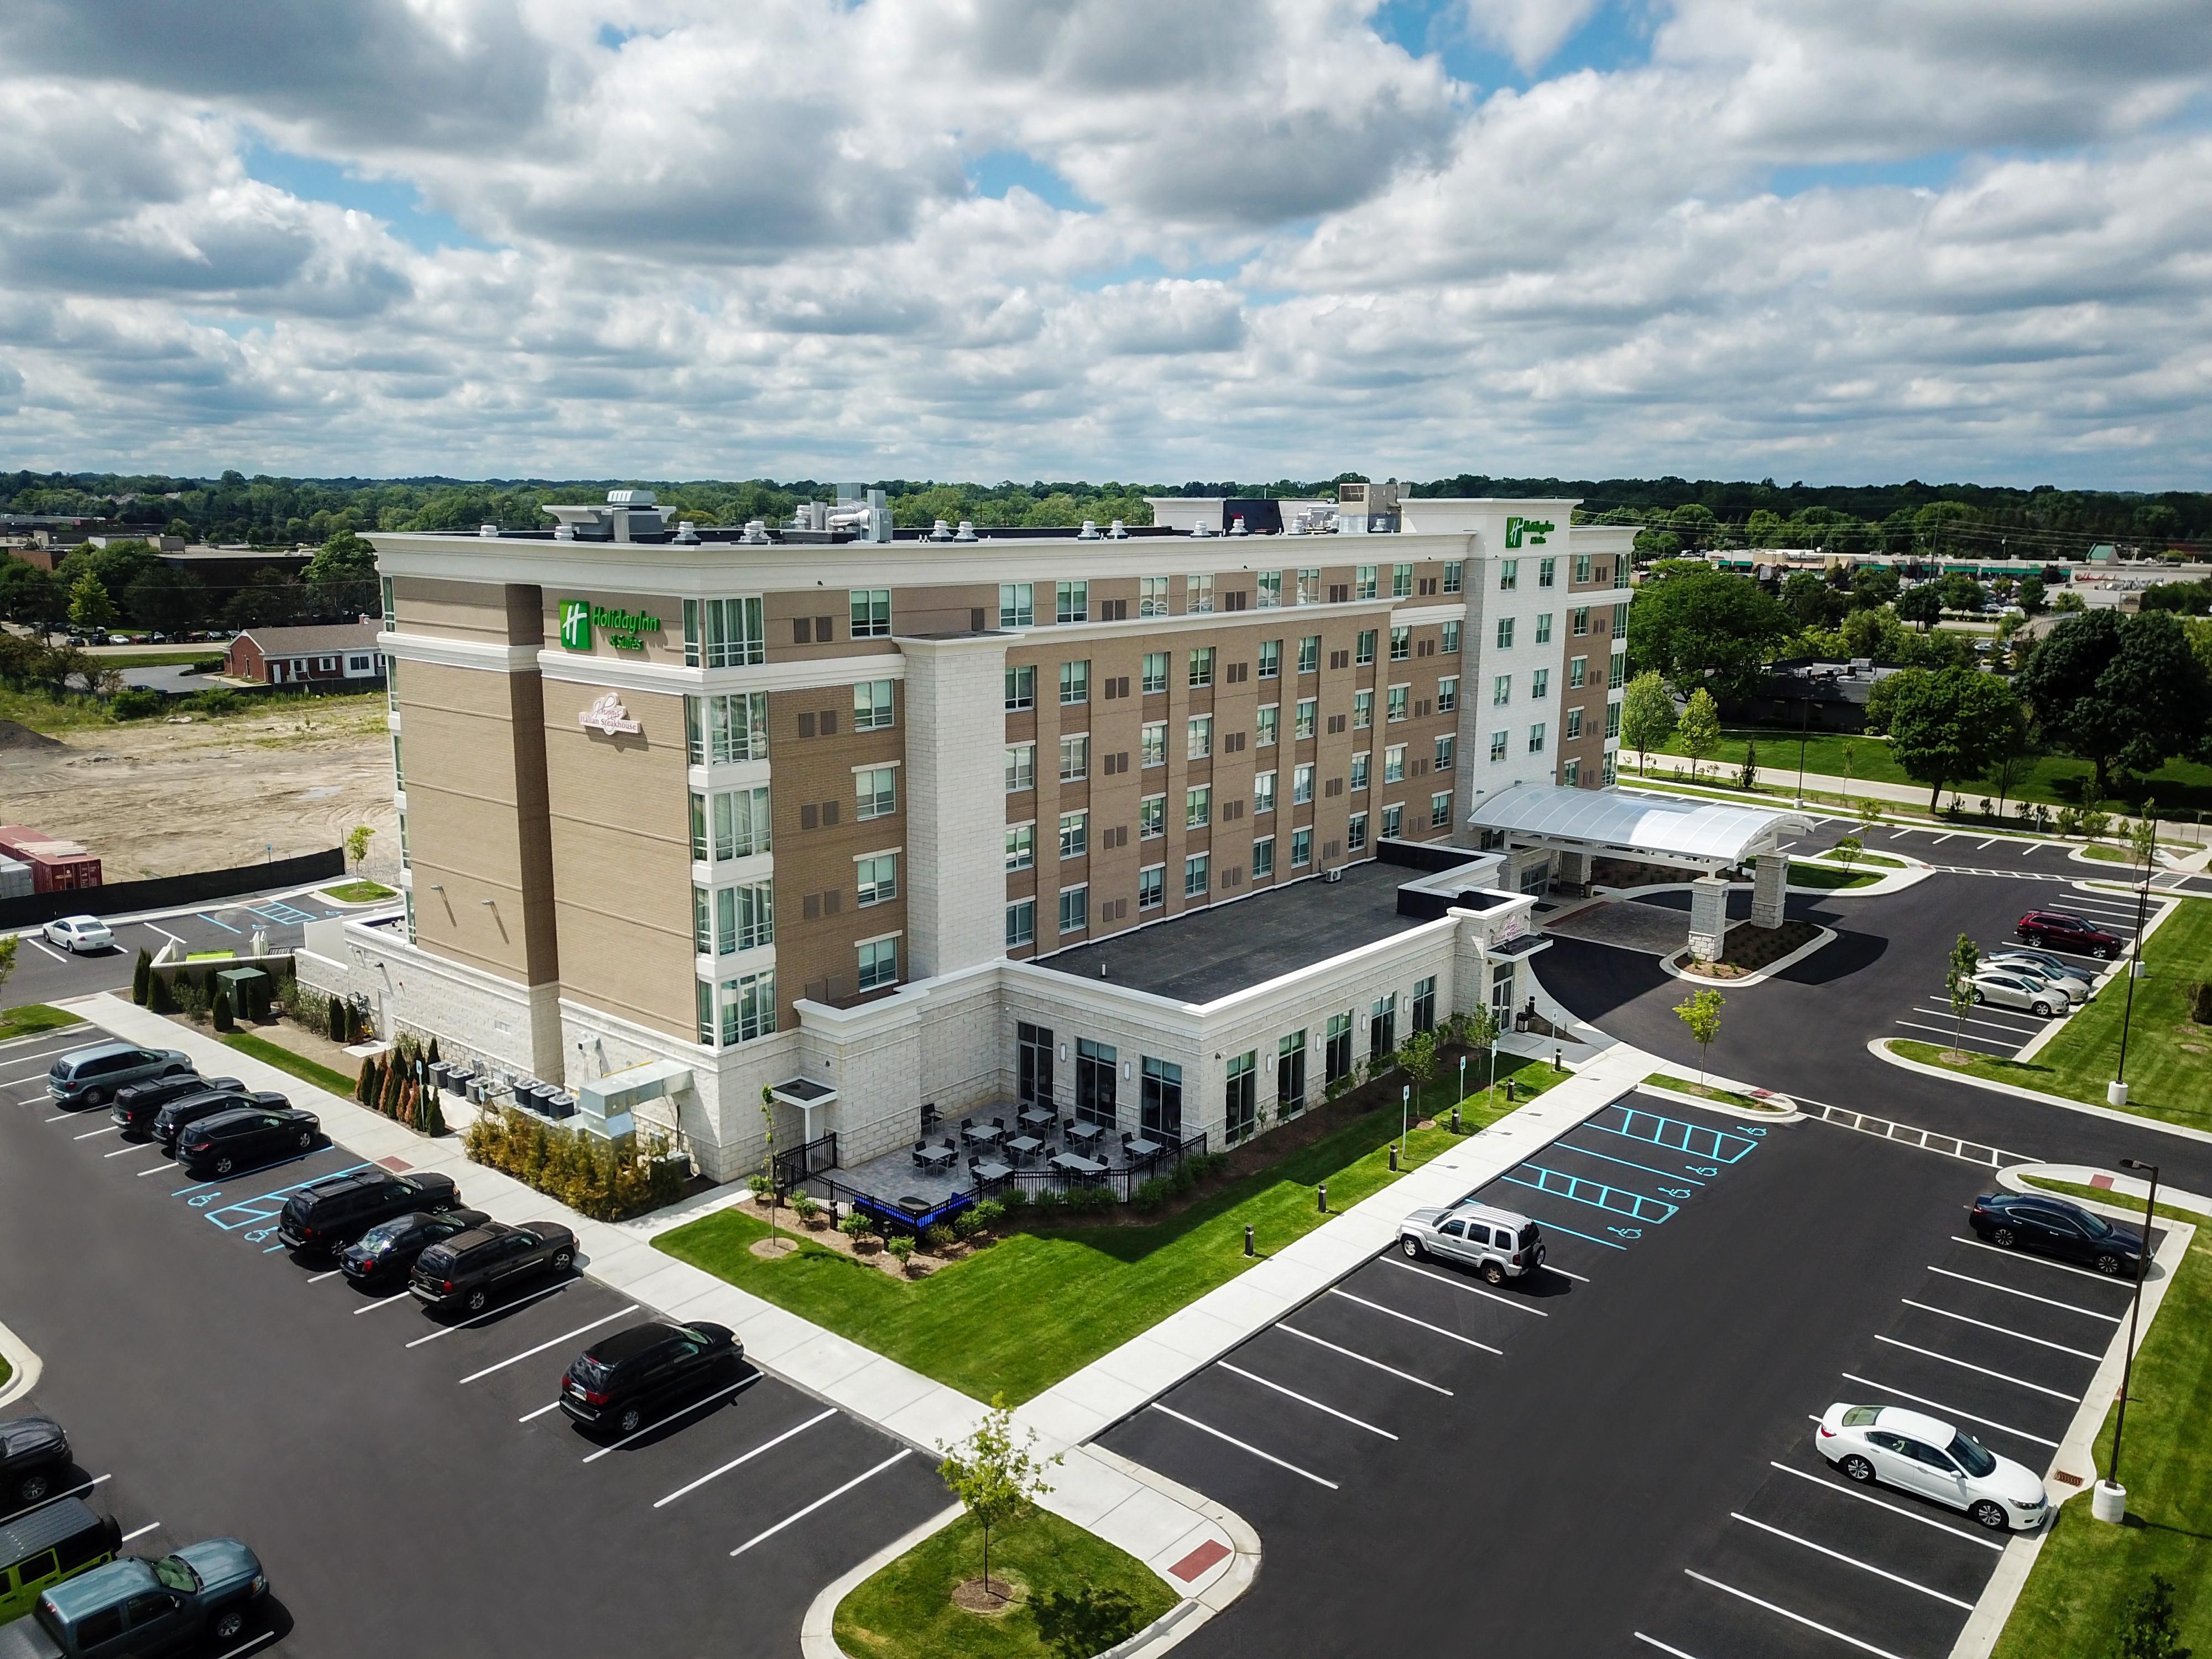 You won’t have to stress about city parking at our Farmington Hills hotel. Our spacious parking lot offers plenty of room for every guest. You won’t have to pay anything extra, either. With a well-lit lot that wraps around our hotel, you’ll enjoy peace of mind when you park your car. 